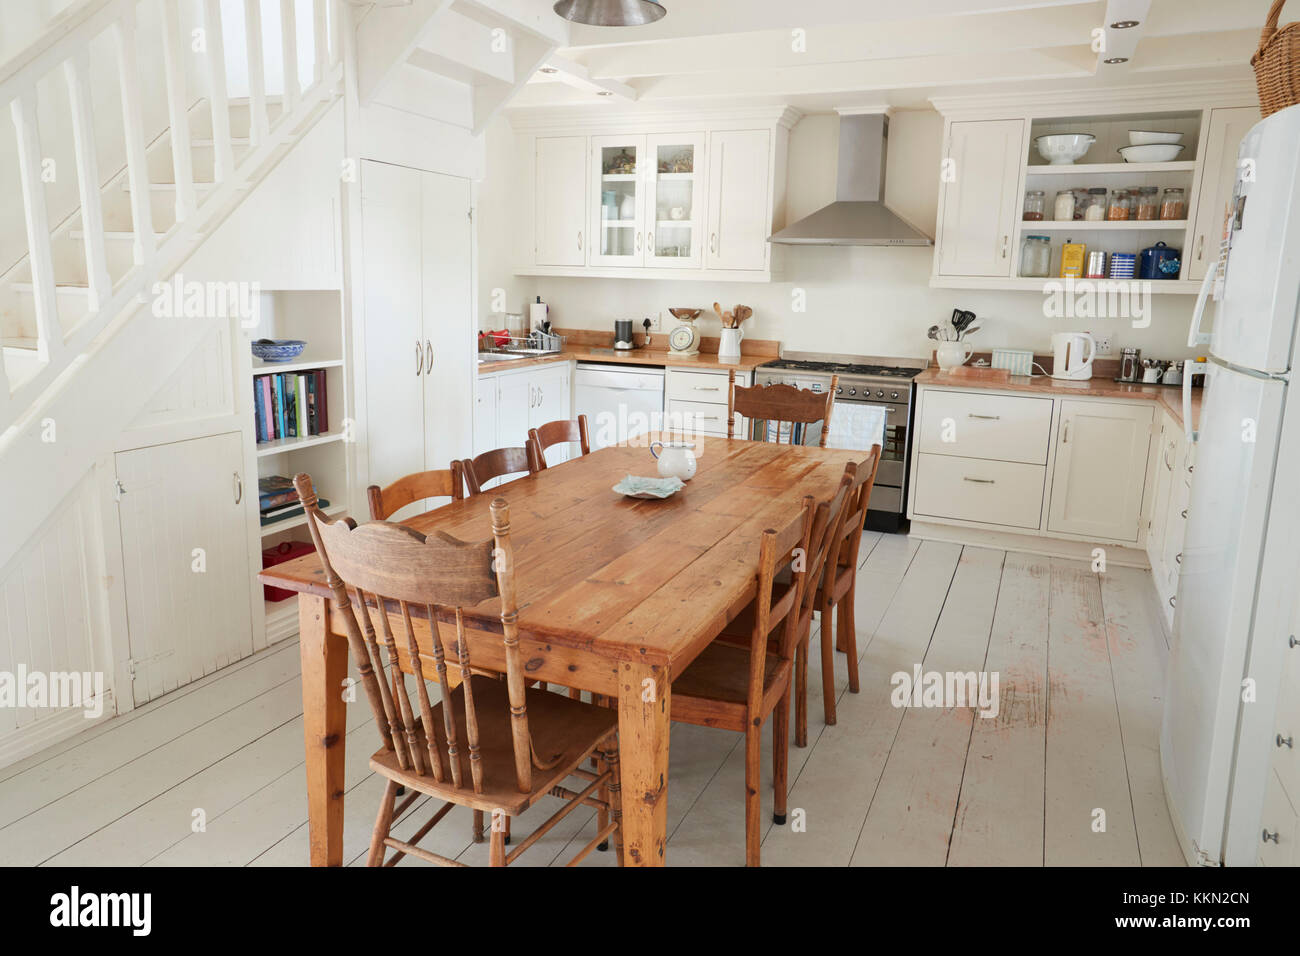 Interior View Of Kitchen With Wooden Dining Table Stock Photo